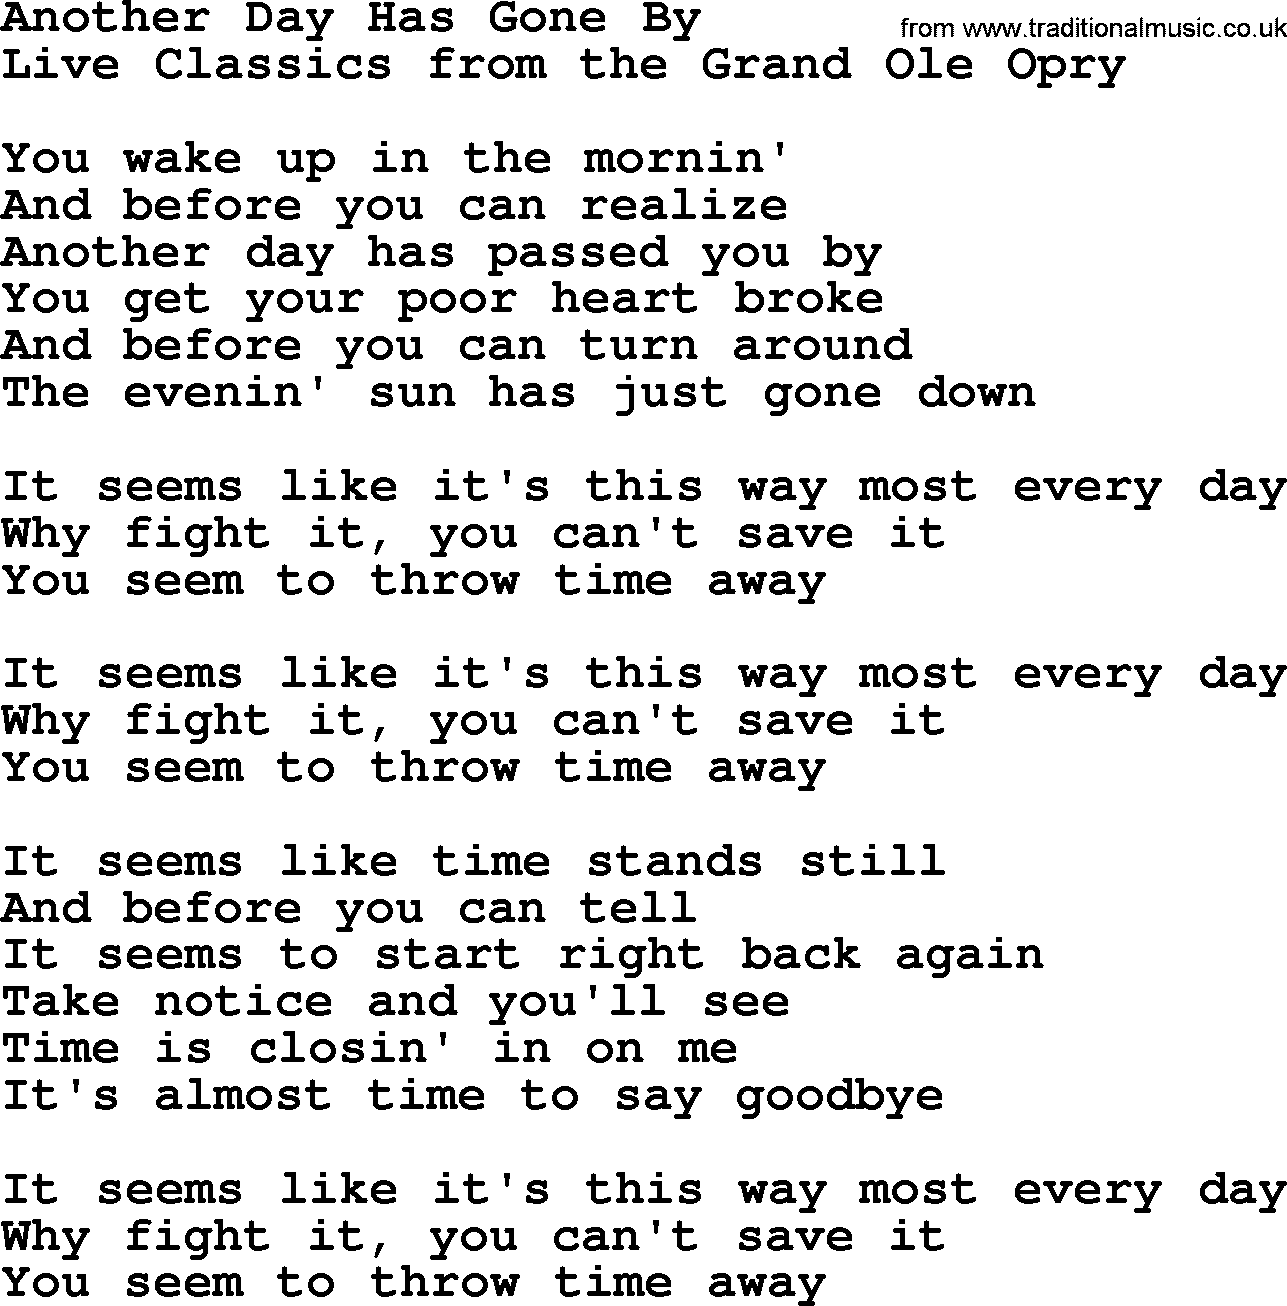 Marty Robbins song: Another Day Has Gone By, lyrics